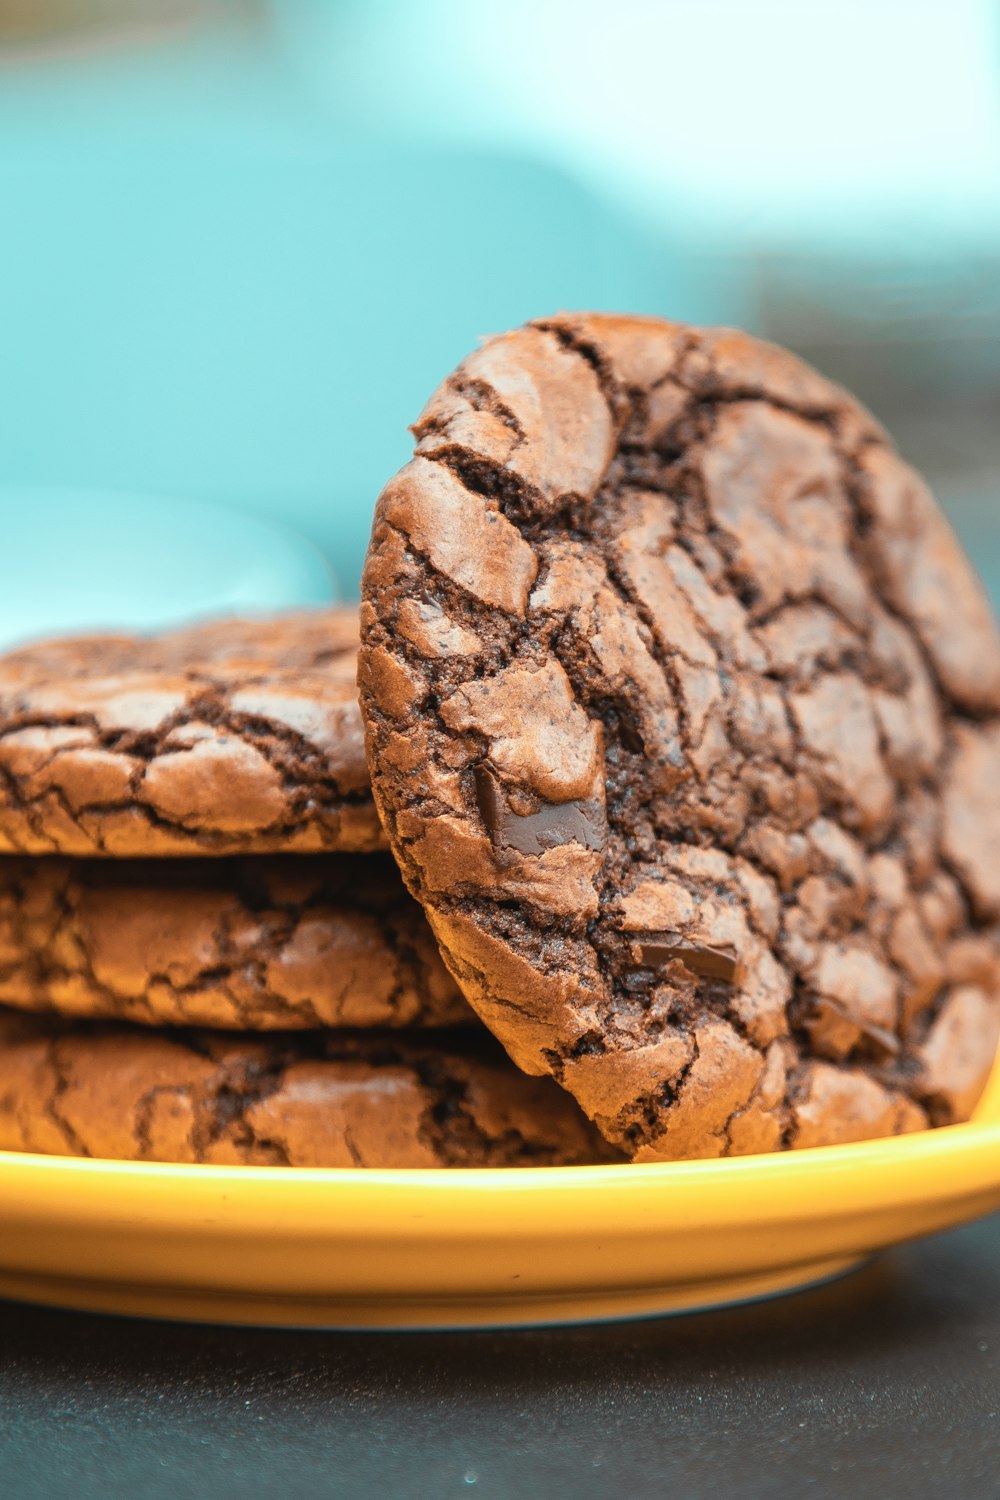 a plate of chocolate cookies on a table